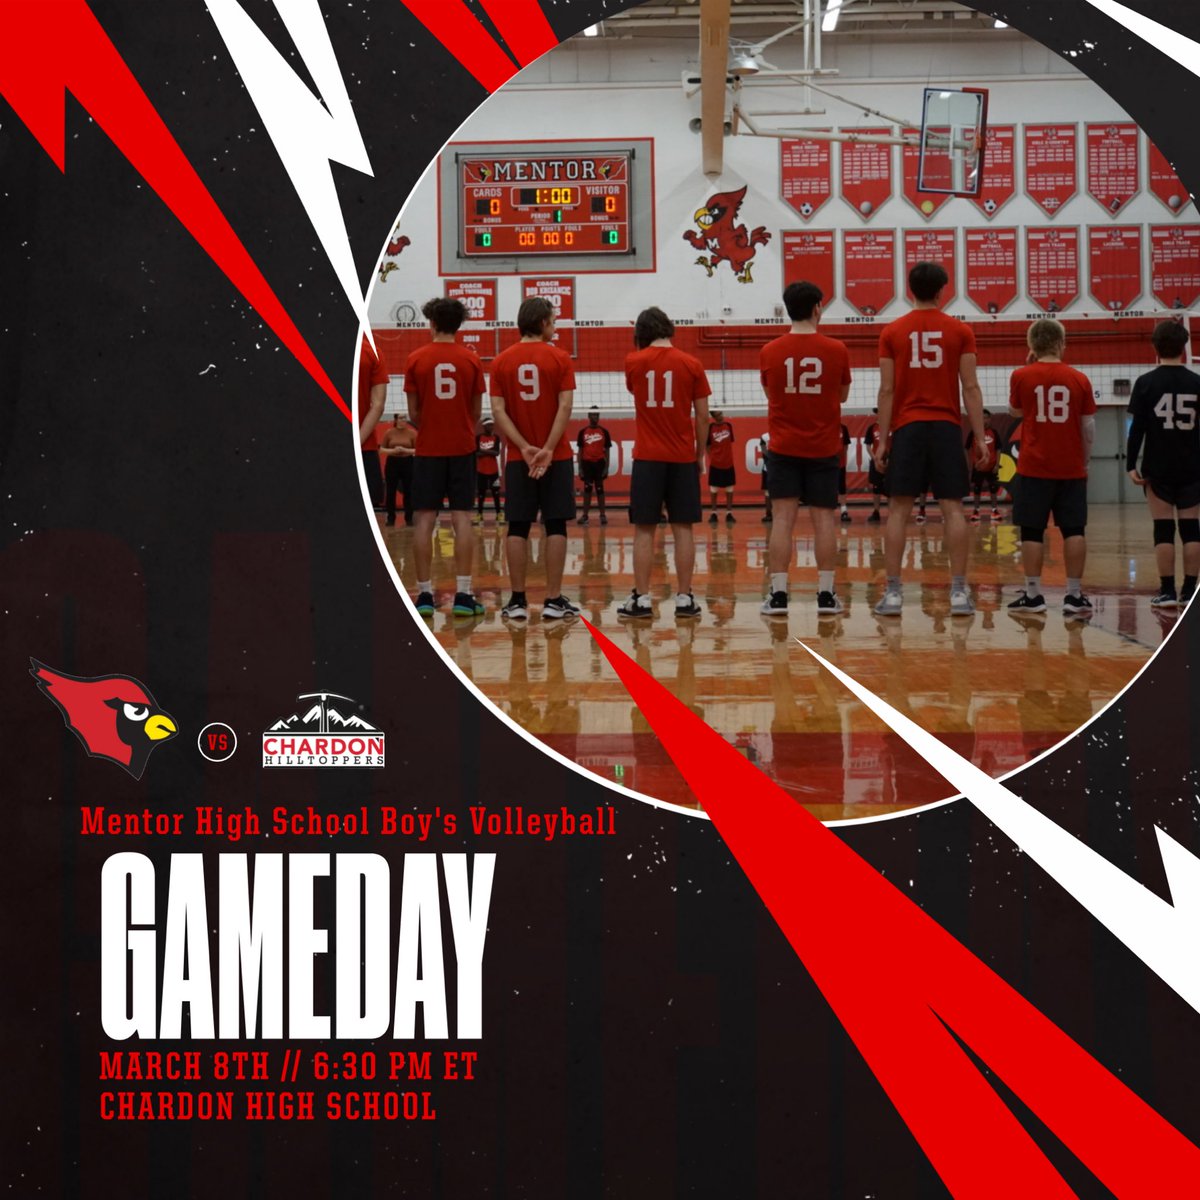 TOMORROW NIGHT!!! Friday 6pm start in the BARN!!! Home opener against Mentor!!! This is going to be a battle!!!! @MentorBoysVBall